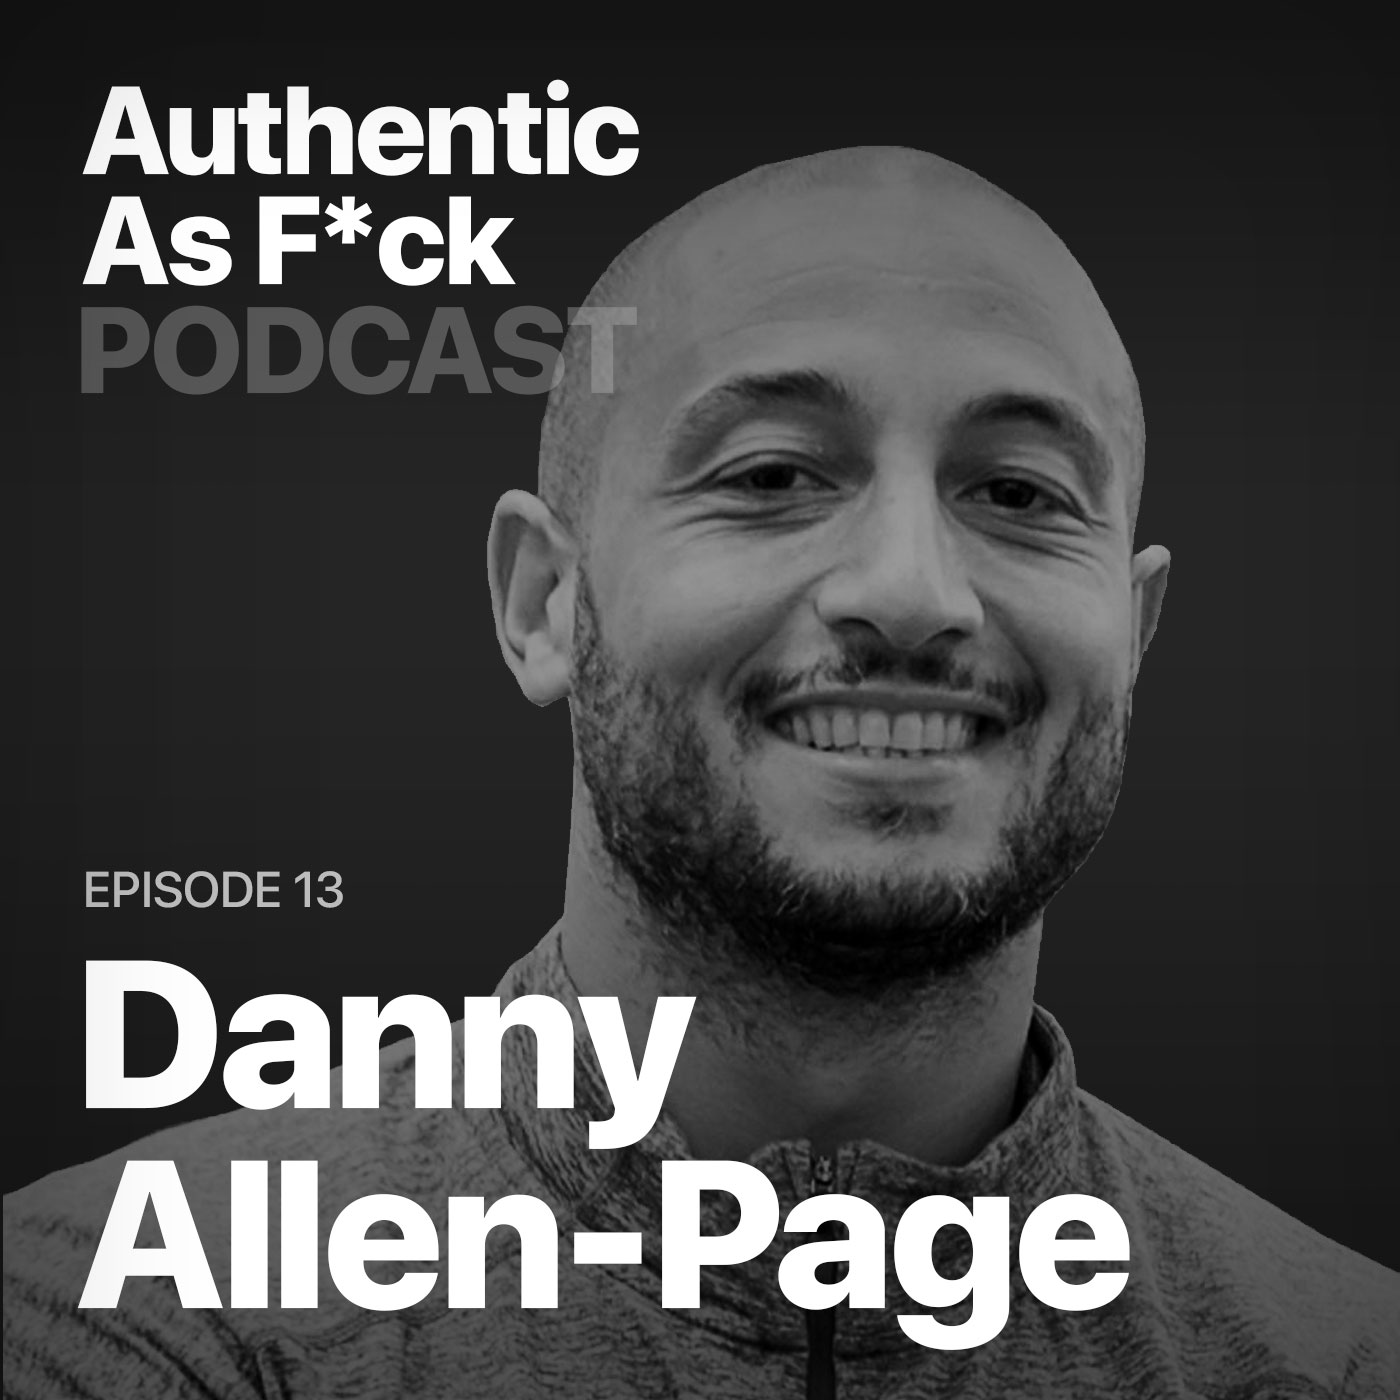 Artwork for podcast Authentic As F*ck Podcast